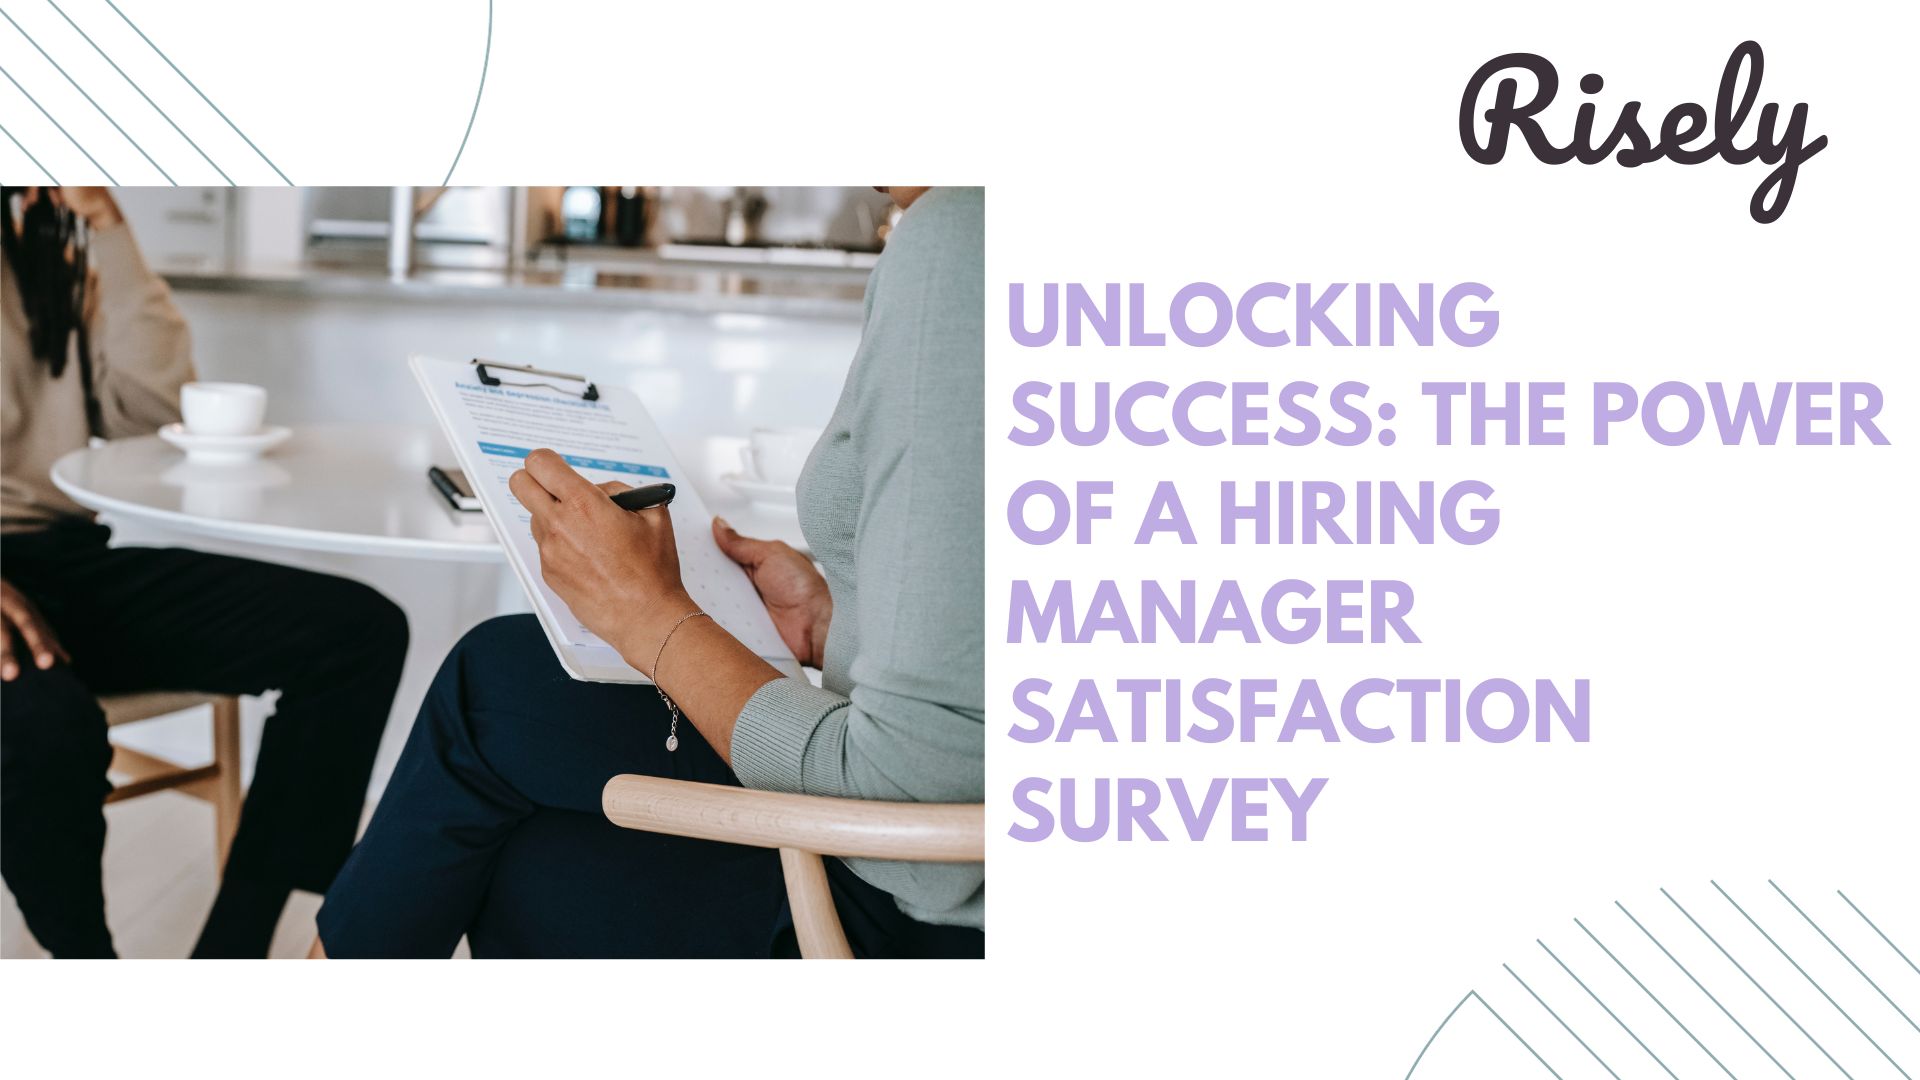 Unlocking Success: The Power of a Hiring Manager Satisfaction Survey